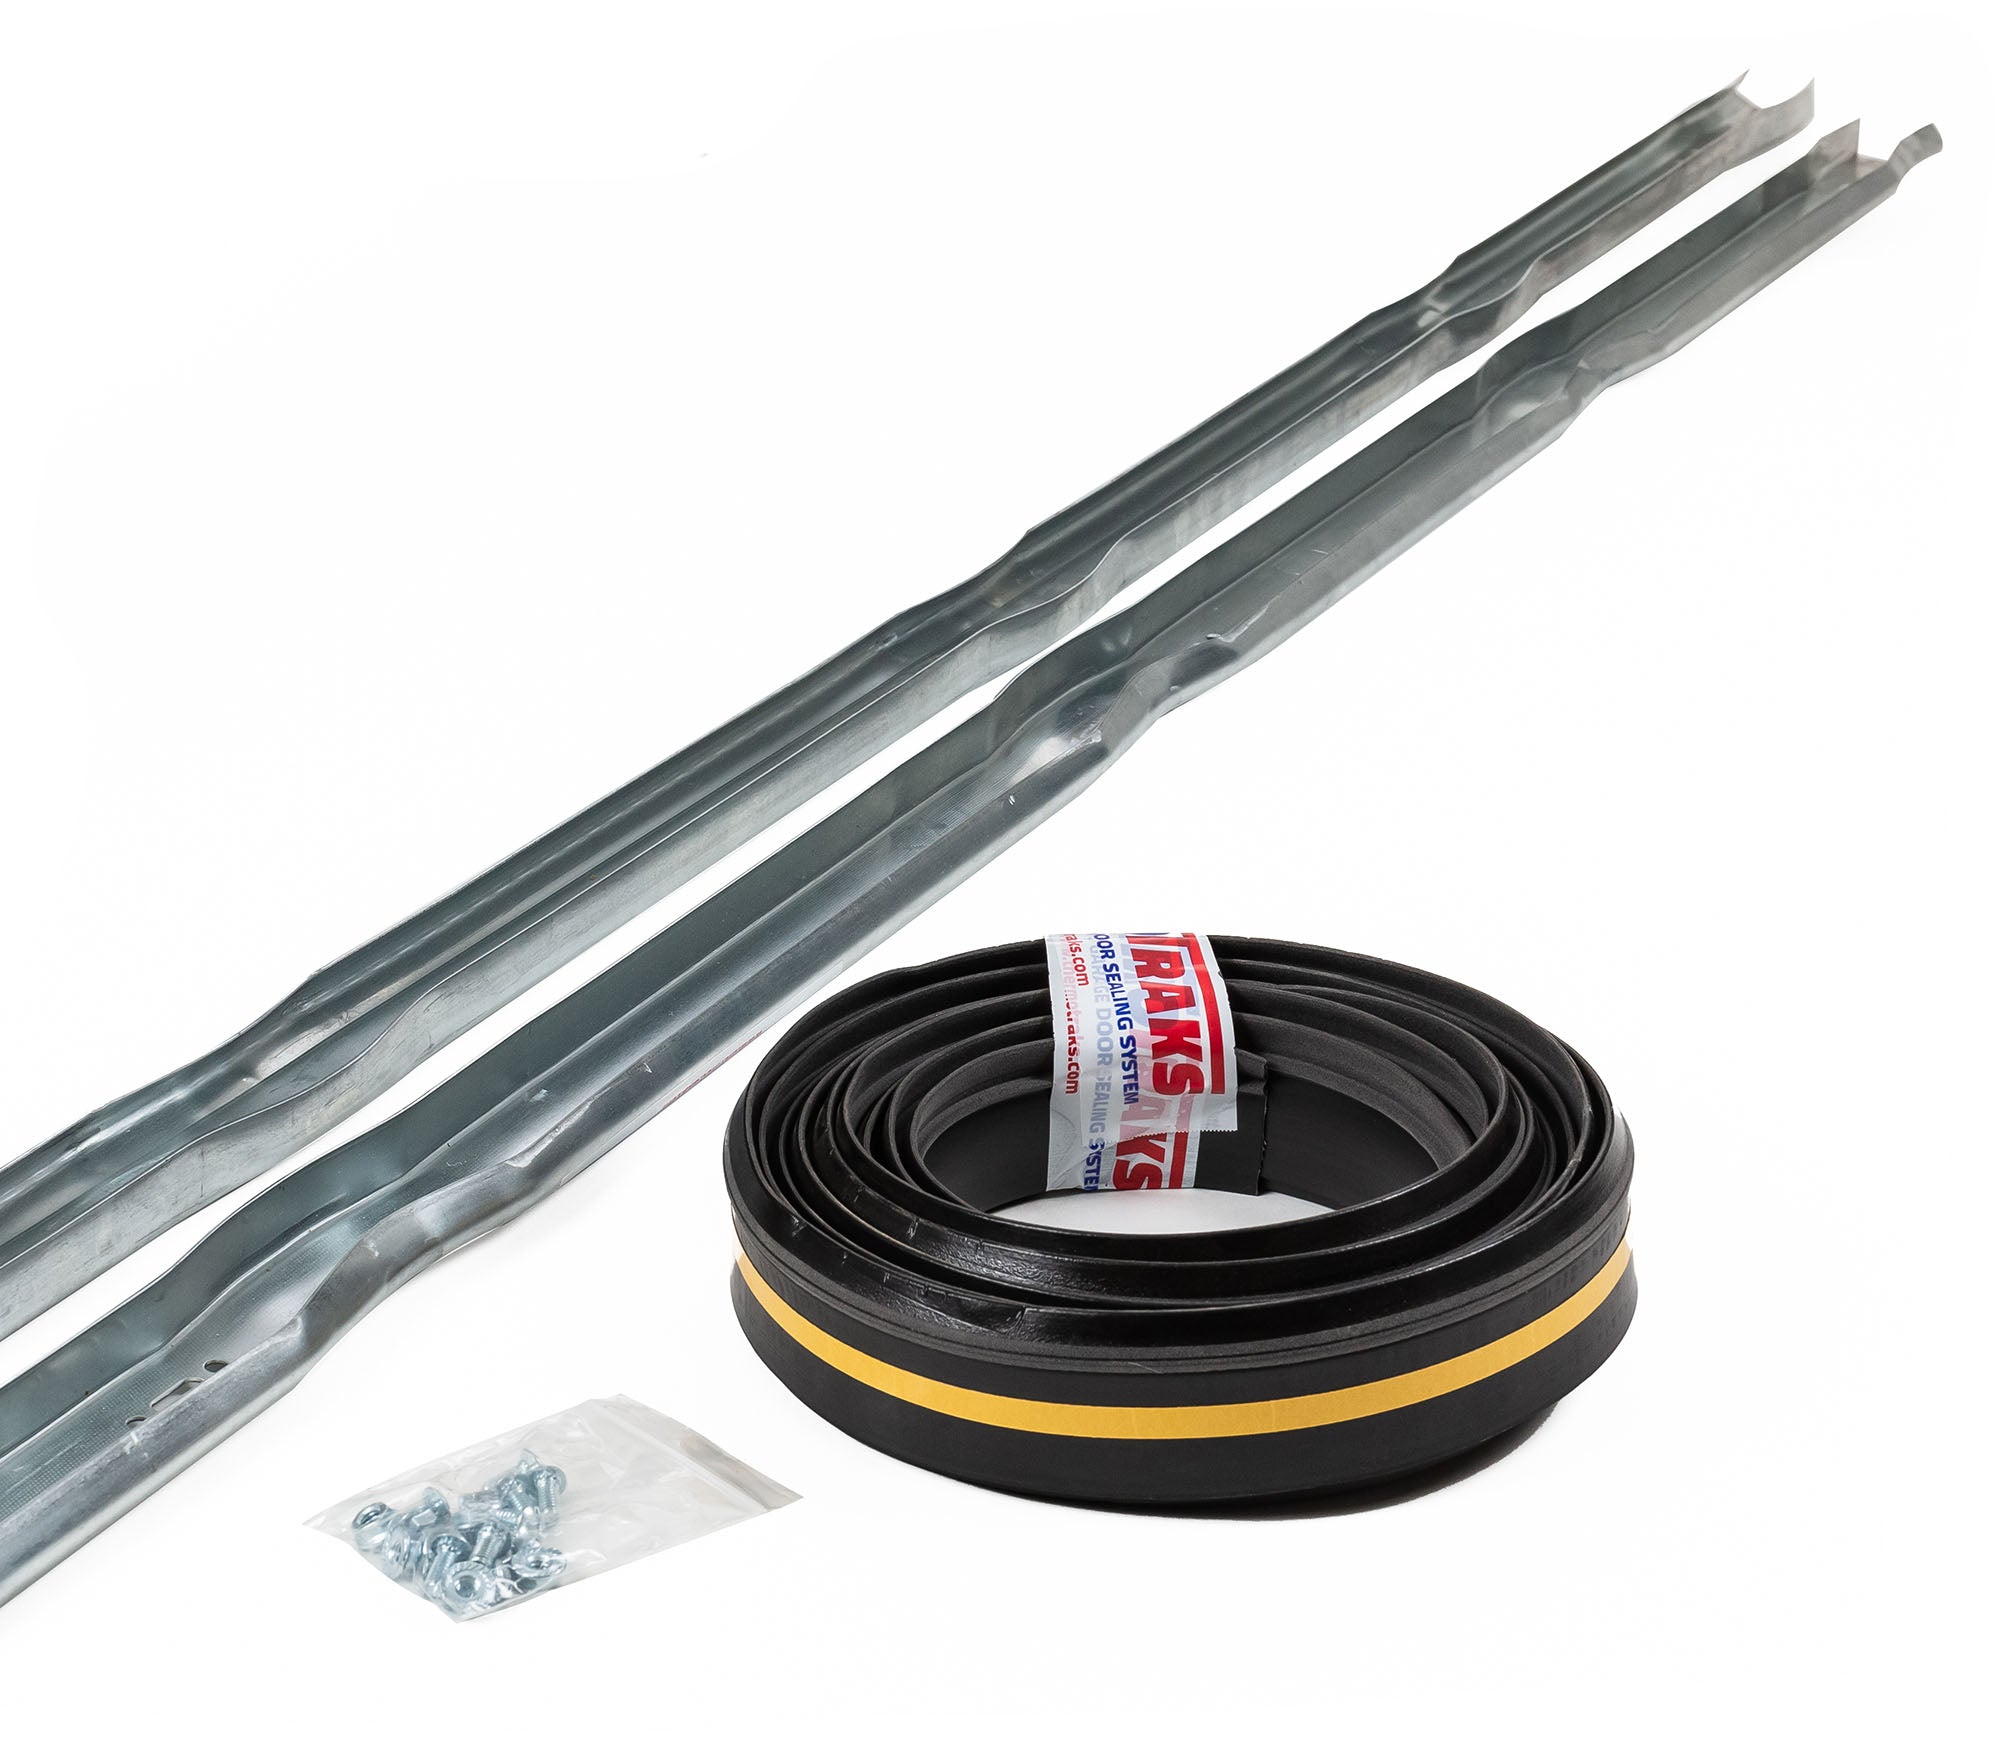 ThermoTraks Kit garage door bottom seal displayed alongside vertical left and right door tracks and track bolts